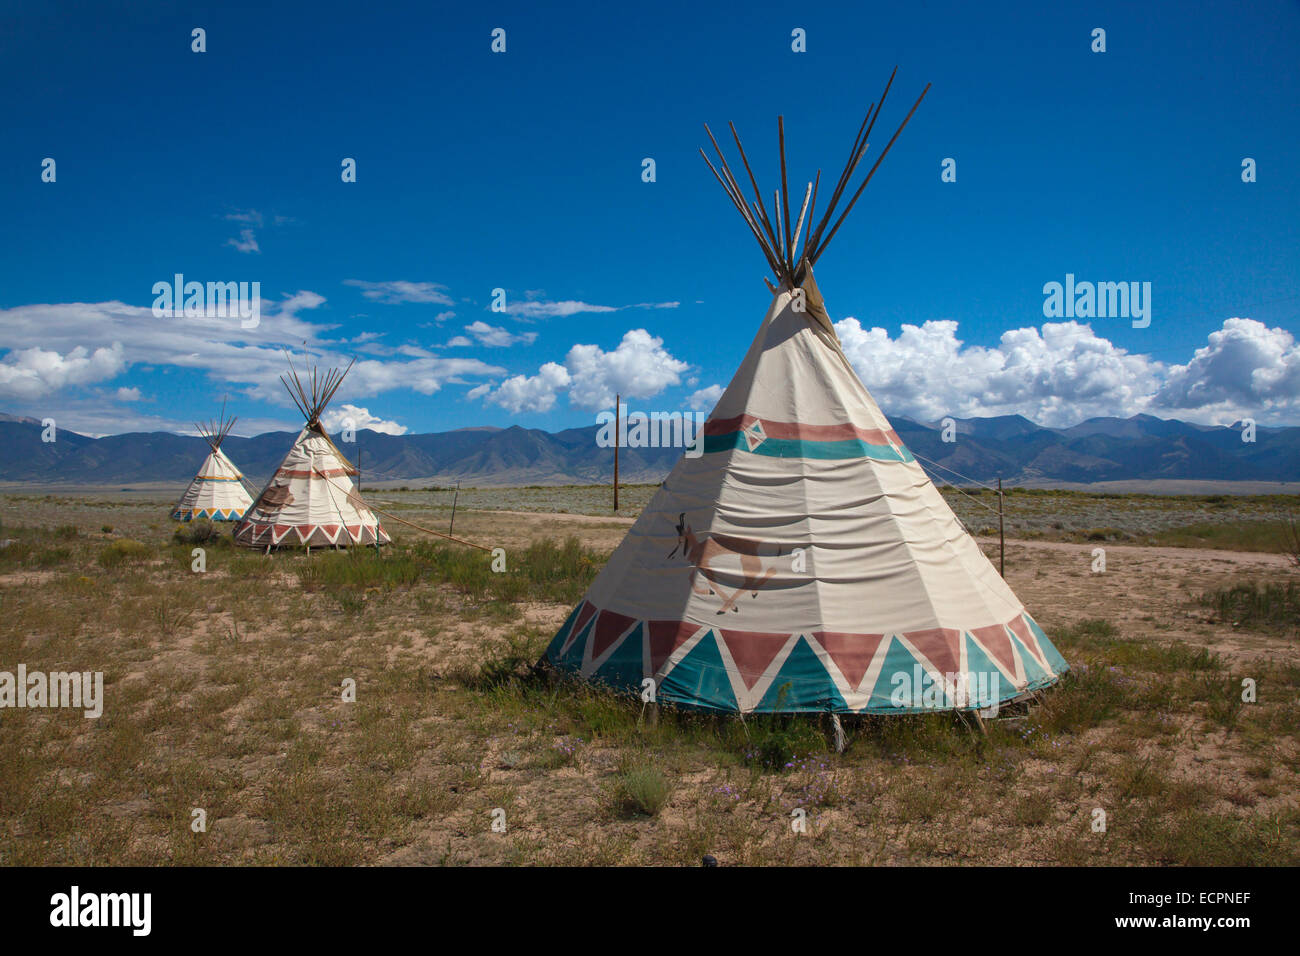 TEEPEES are used as accomodations at JOYFUL JOURNEYS HOT SPRINGS - MOFFAT COLORADO Stock Photo